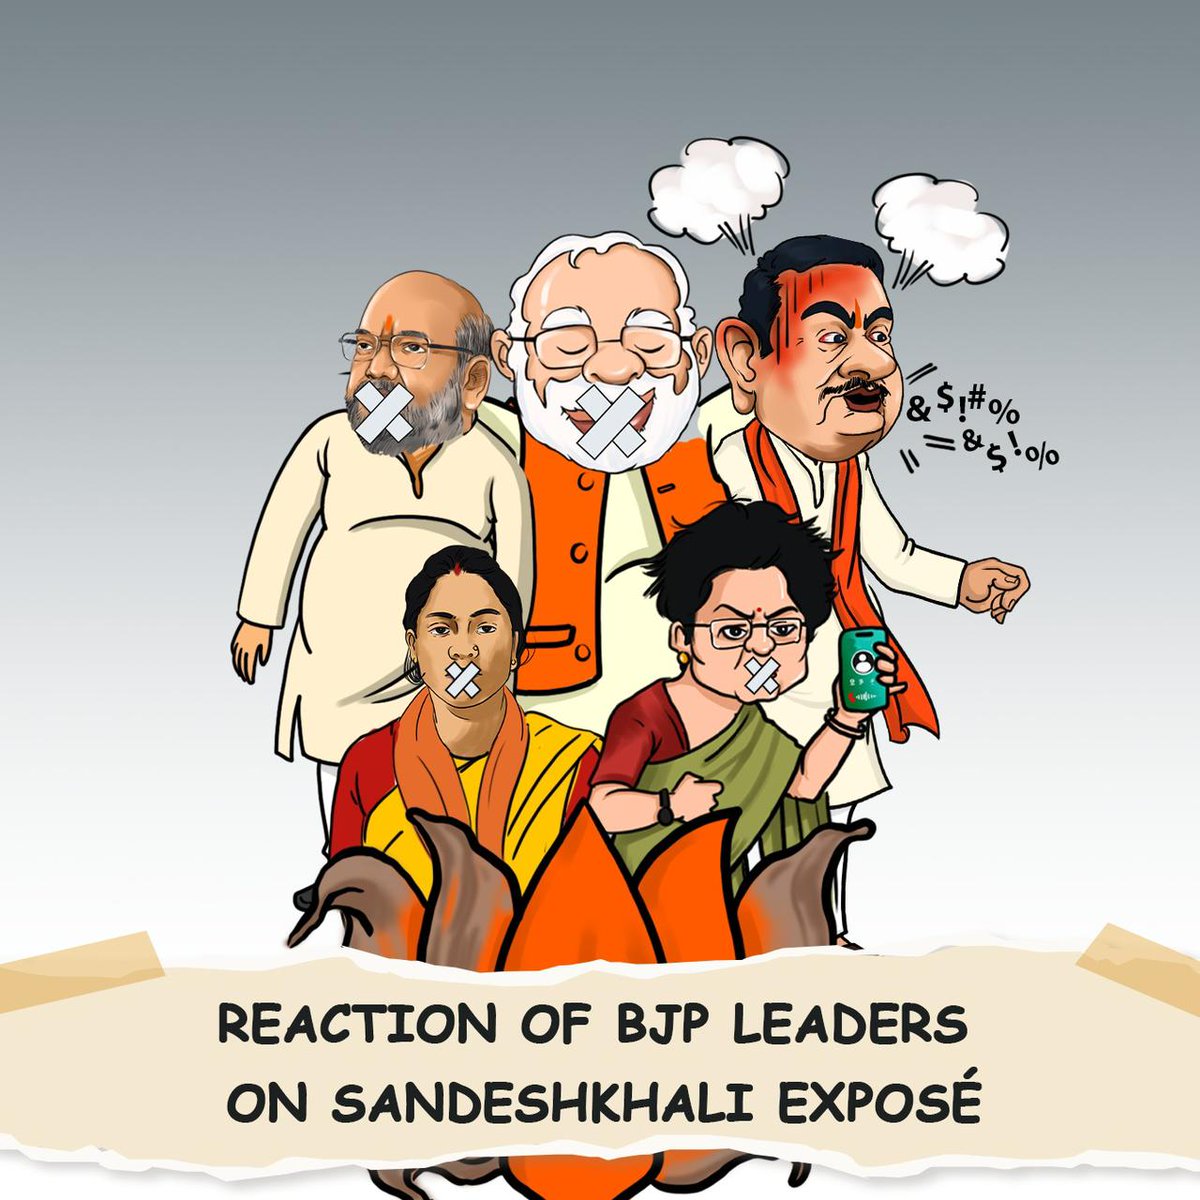 Want to know the reaction of BJP Leaders on the Sandeshkhali exposé? Here it is 👇

PM @narendramodi - 🤐

HM @AmitShah - 🤐

LoP @SuvenduWB - 🤬 (Busy abusing women)

BJP Candidate Rekha Patra - 🤐

NCW Chief @sharmarekha - 🤐

#SandeshkhaliExposed